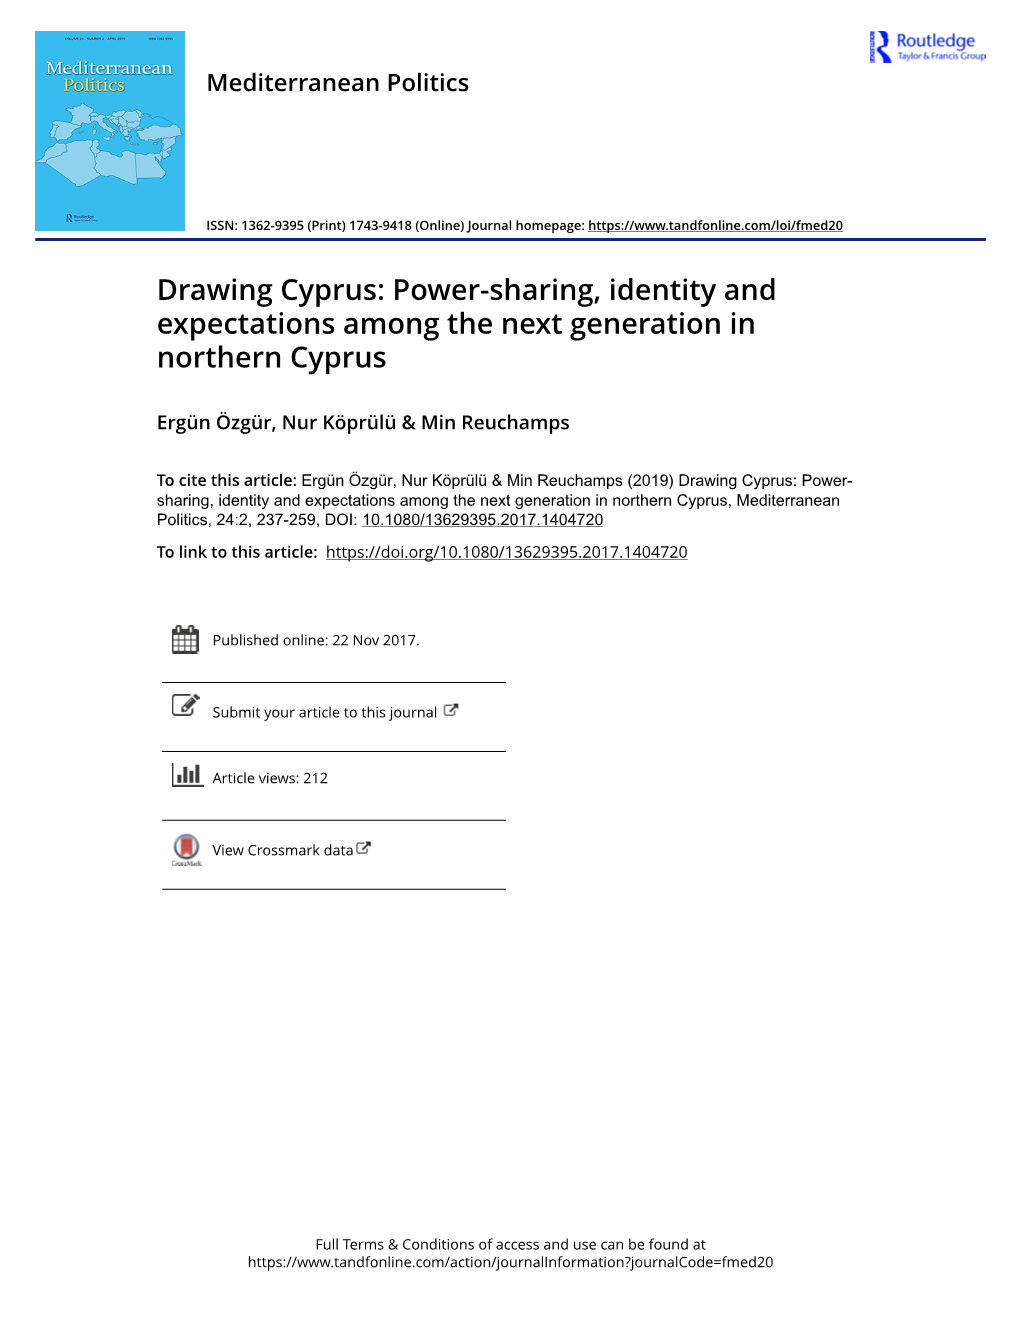 Drawing Cyprus: Power-Sharing, Identity and Expectations Among the Next Generation in Northern Cyprus